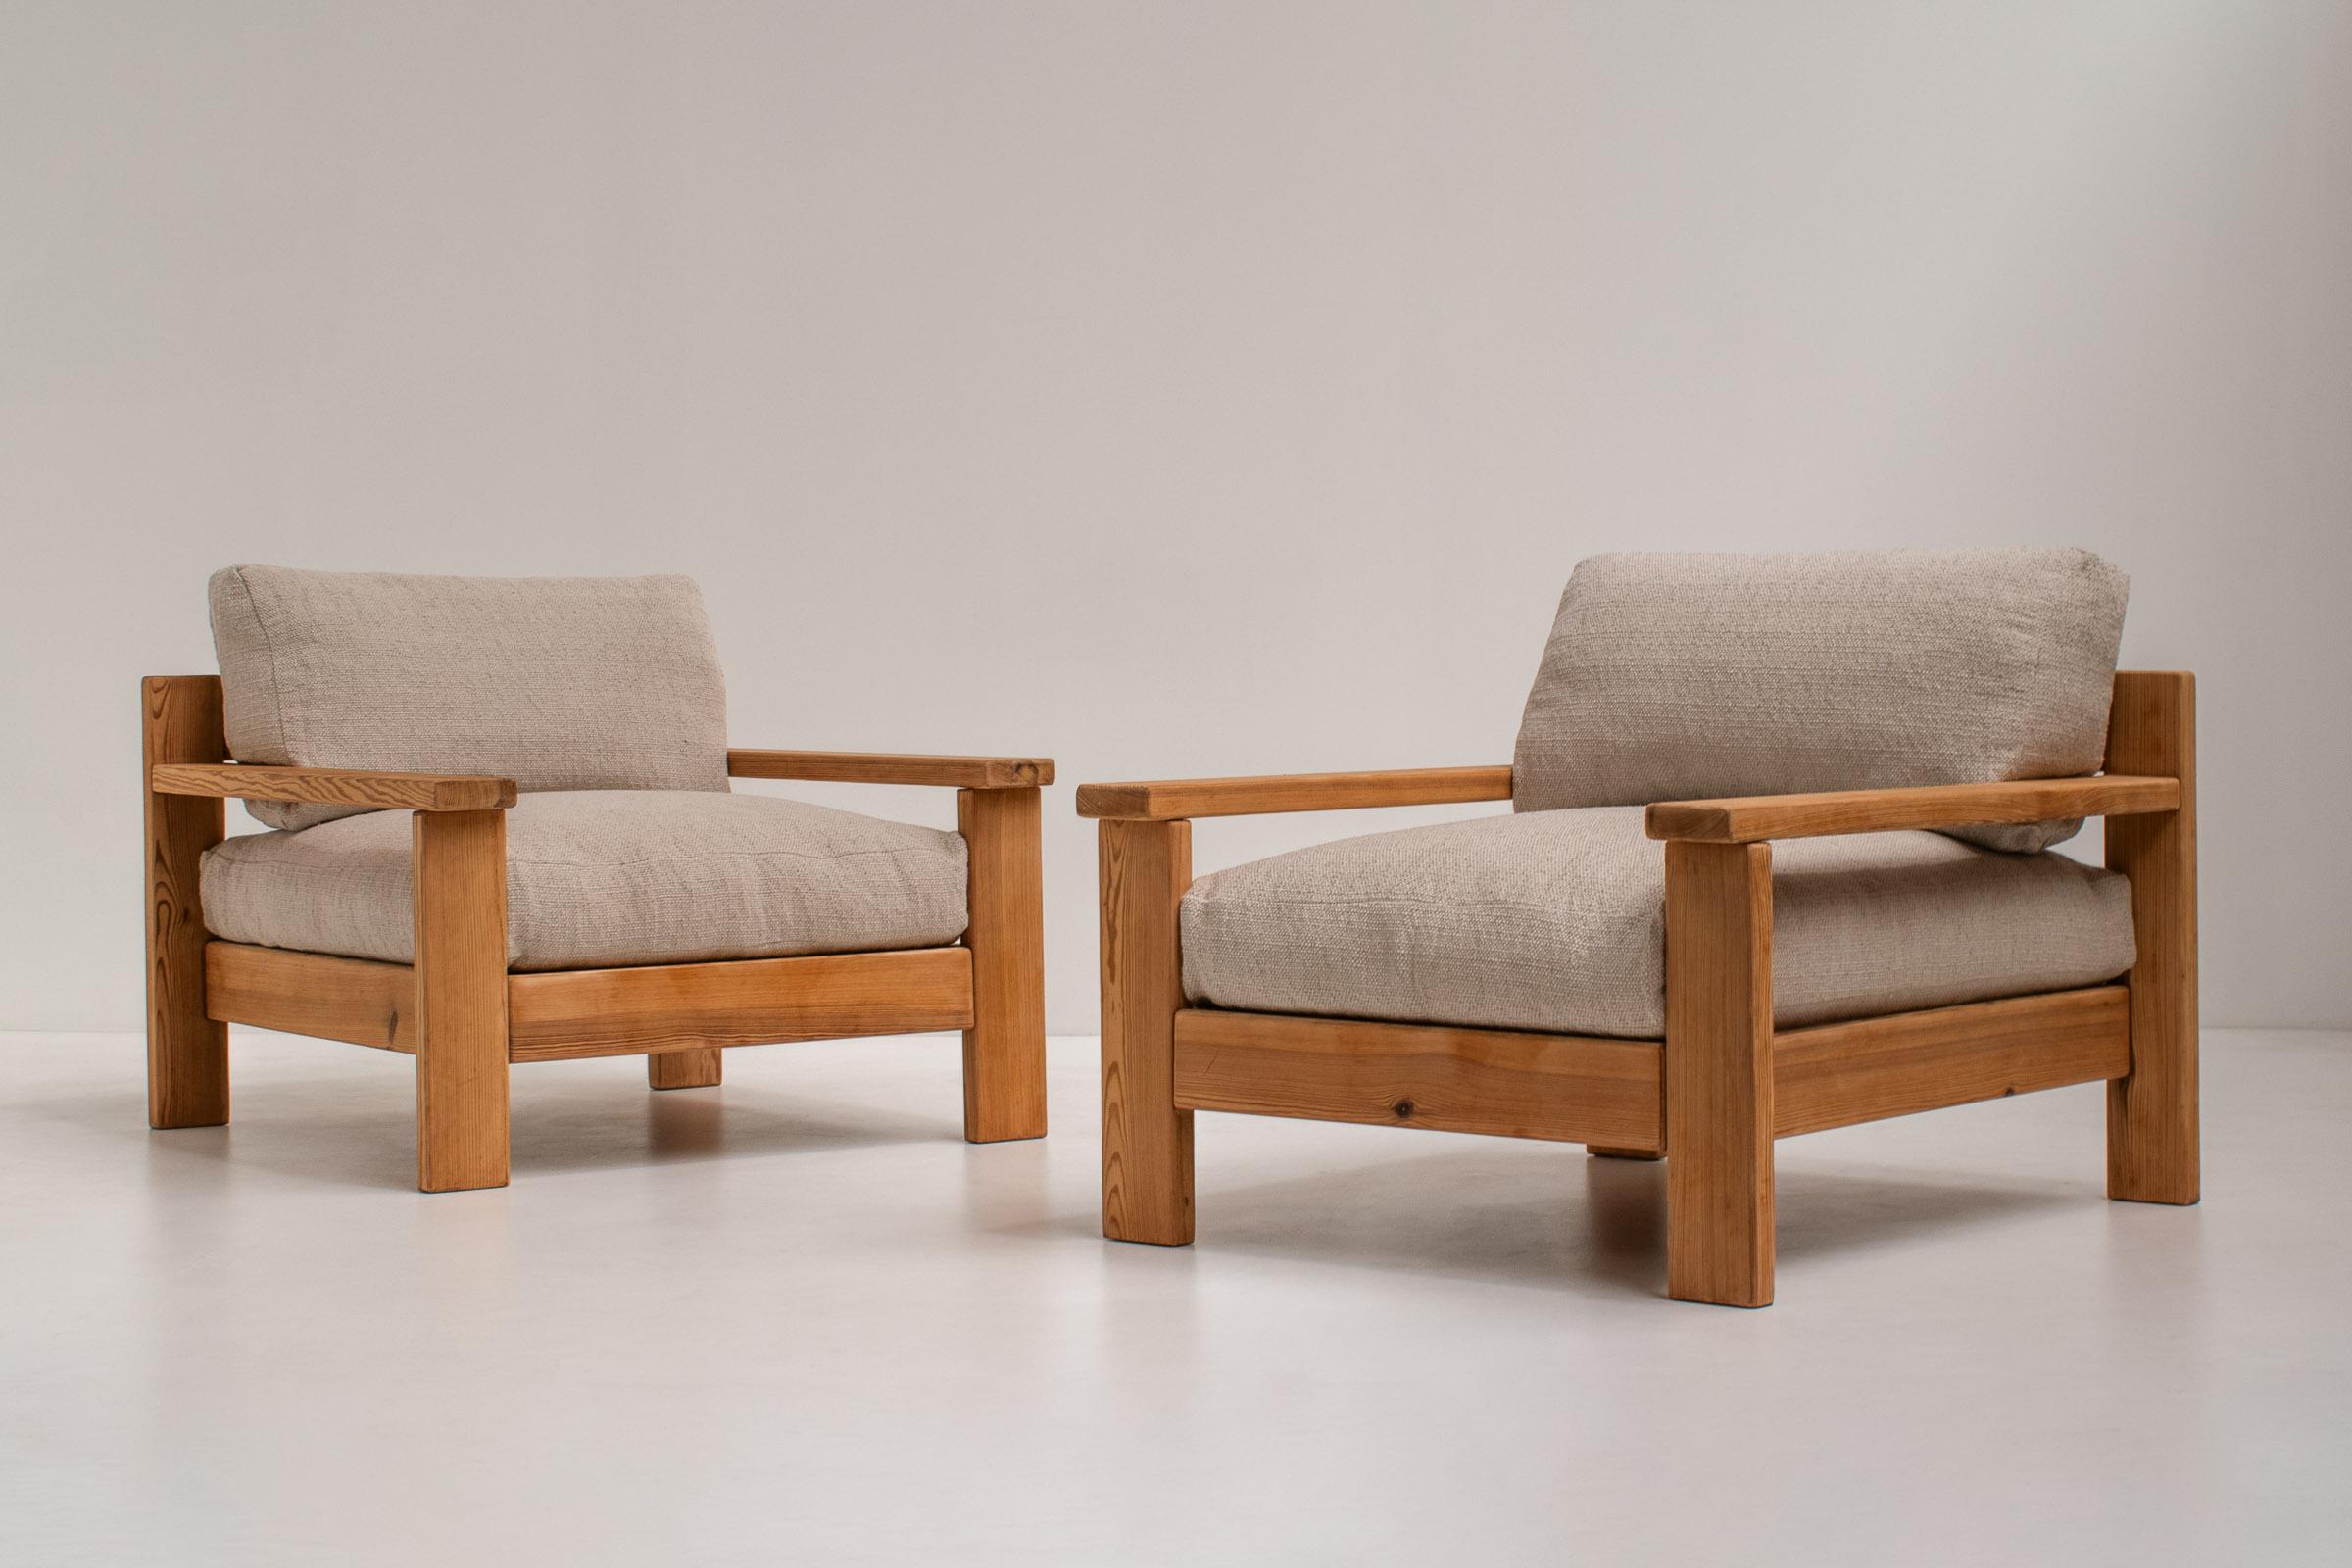 Minimalistic Mid-century Modern Lounge Chairs in Natural Wood, Italy, 1970s In Good Condition For Sale In Antwerp, BE